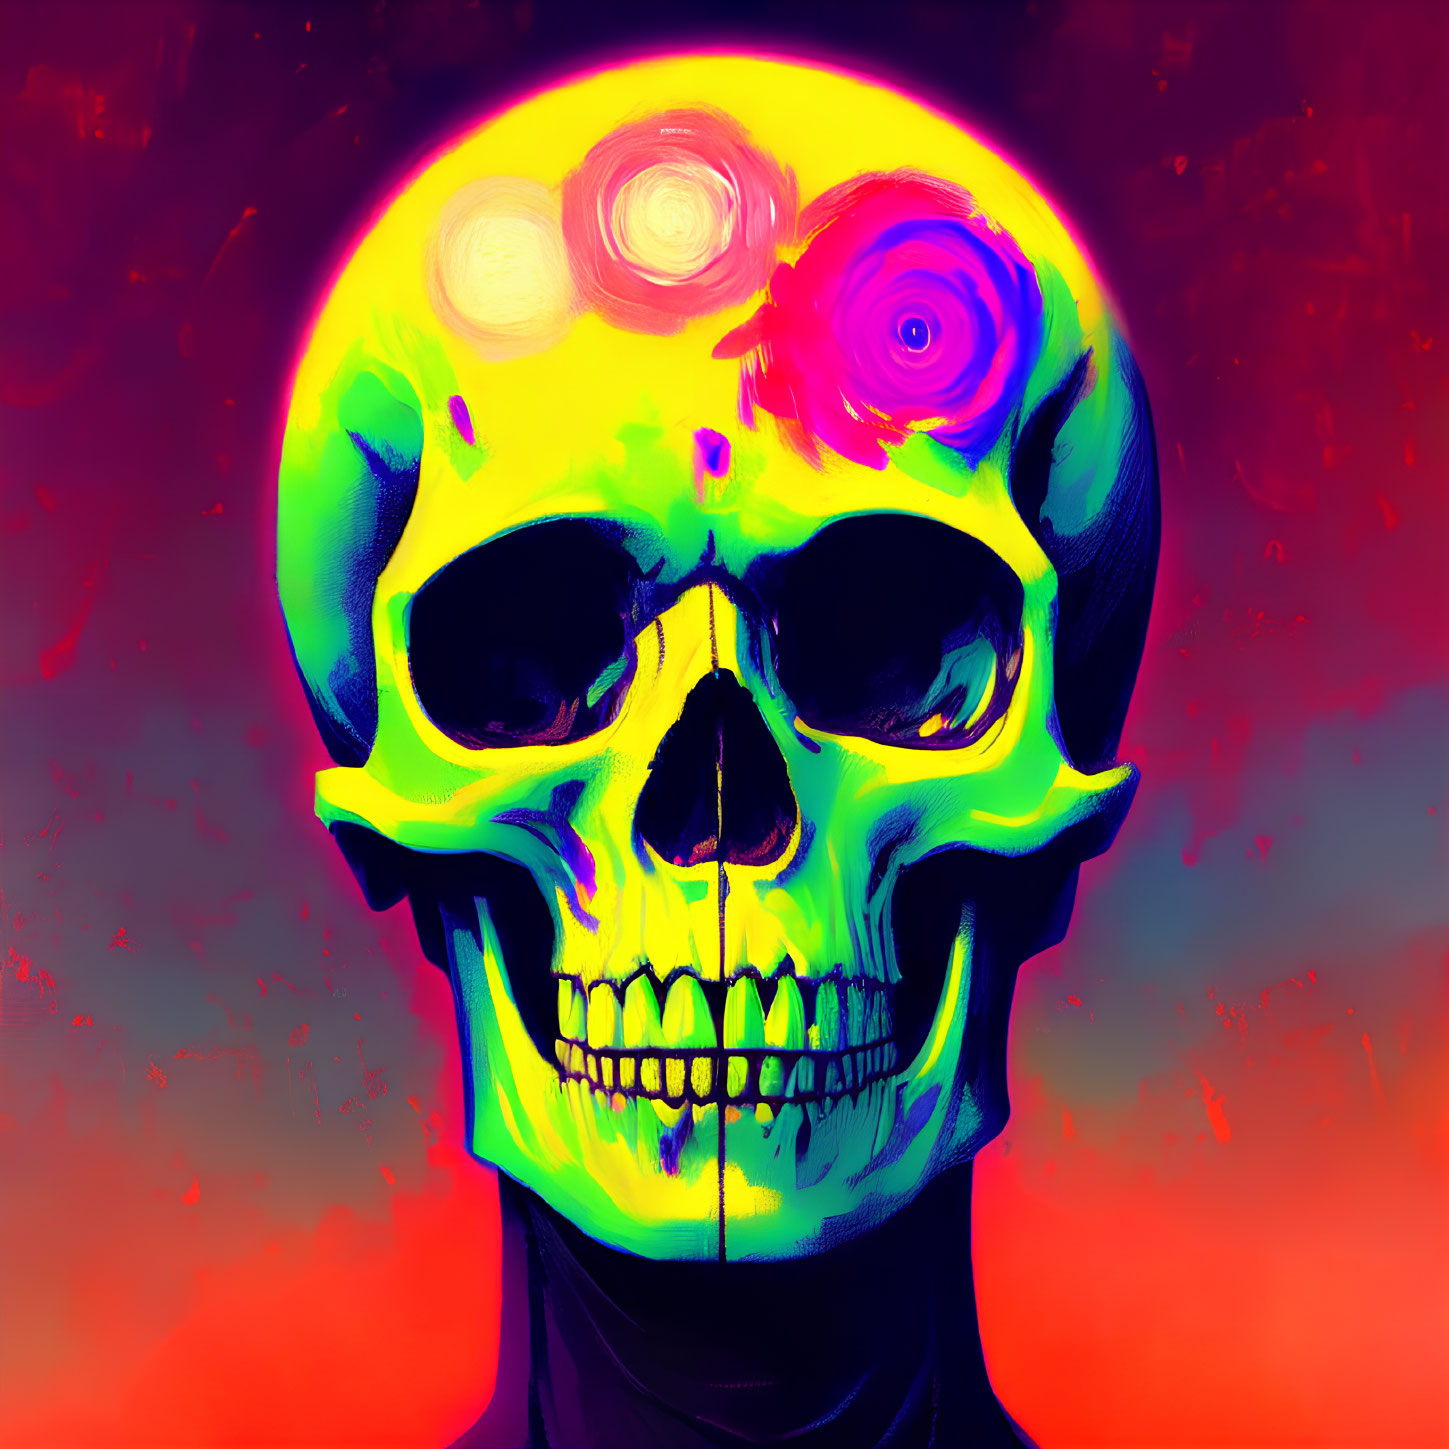 Colorful Skull Artwork with Neon Yellow and Purple Tones